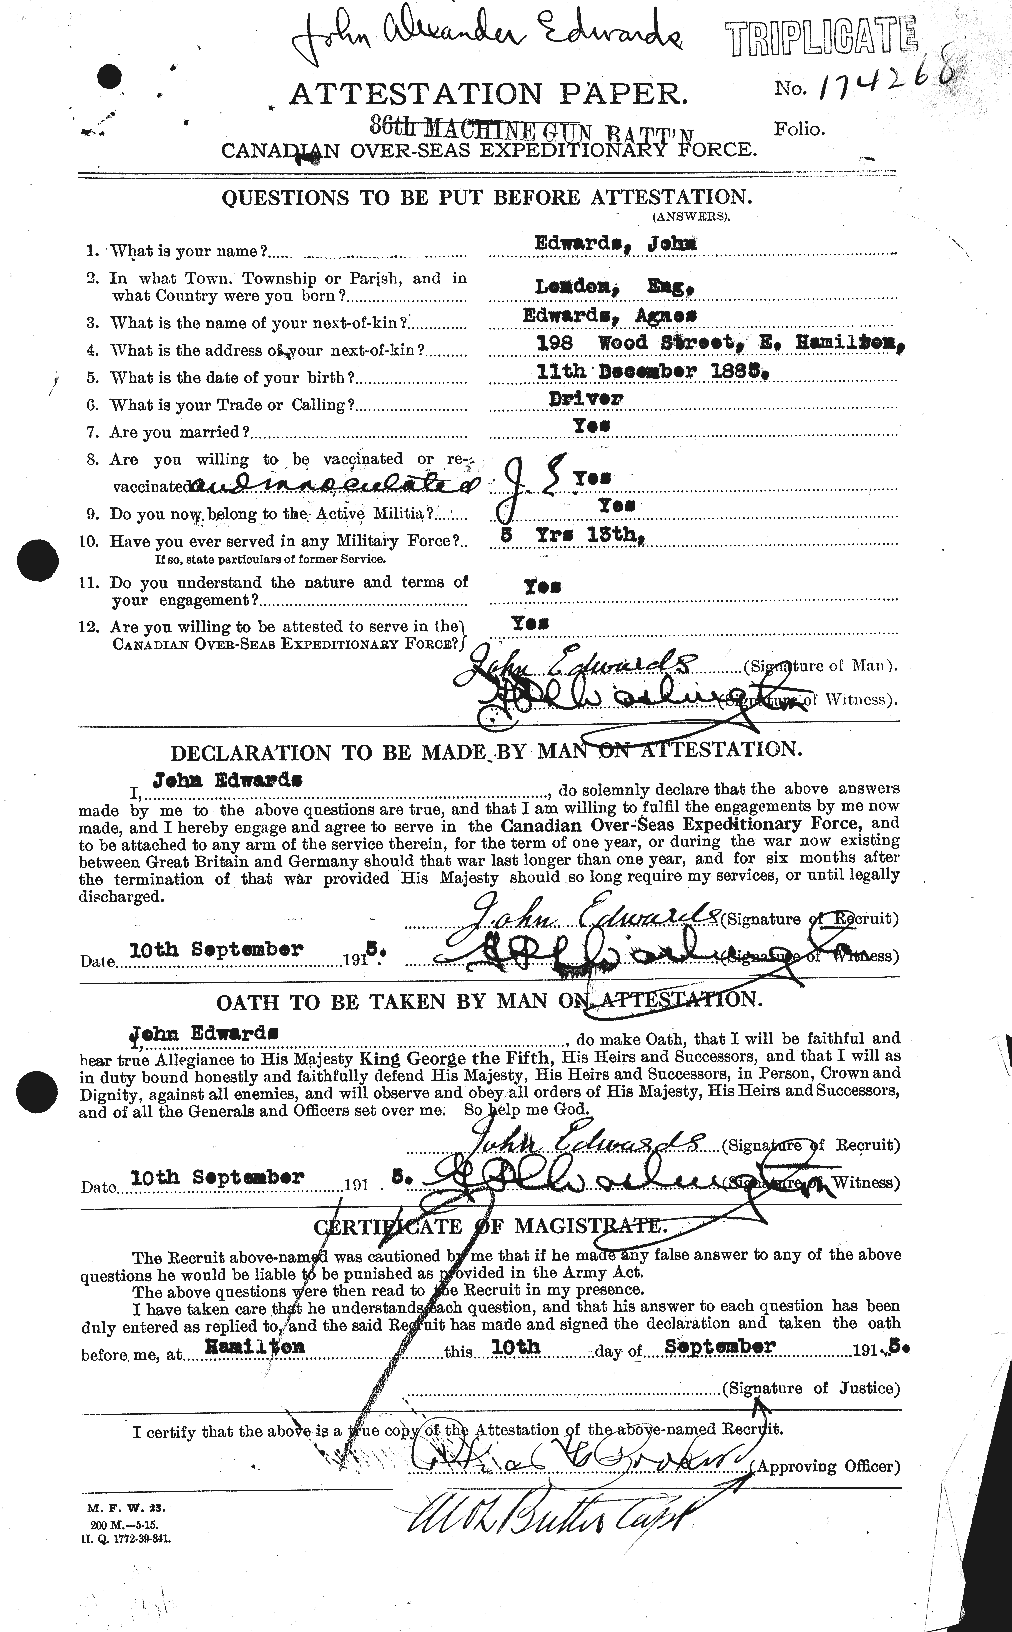 Personnel Records of the First World War - CEF 309839a